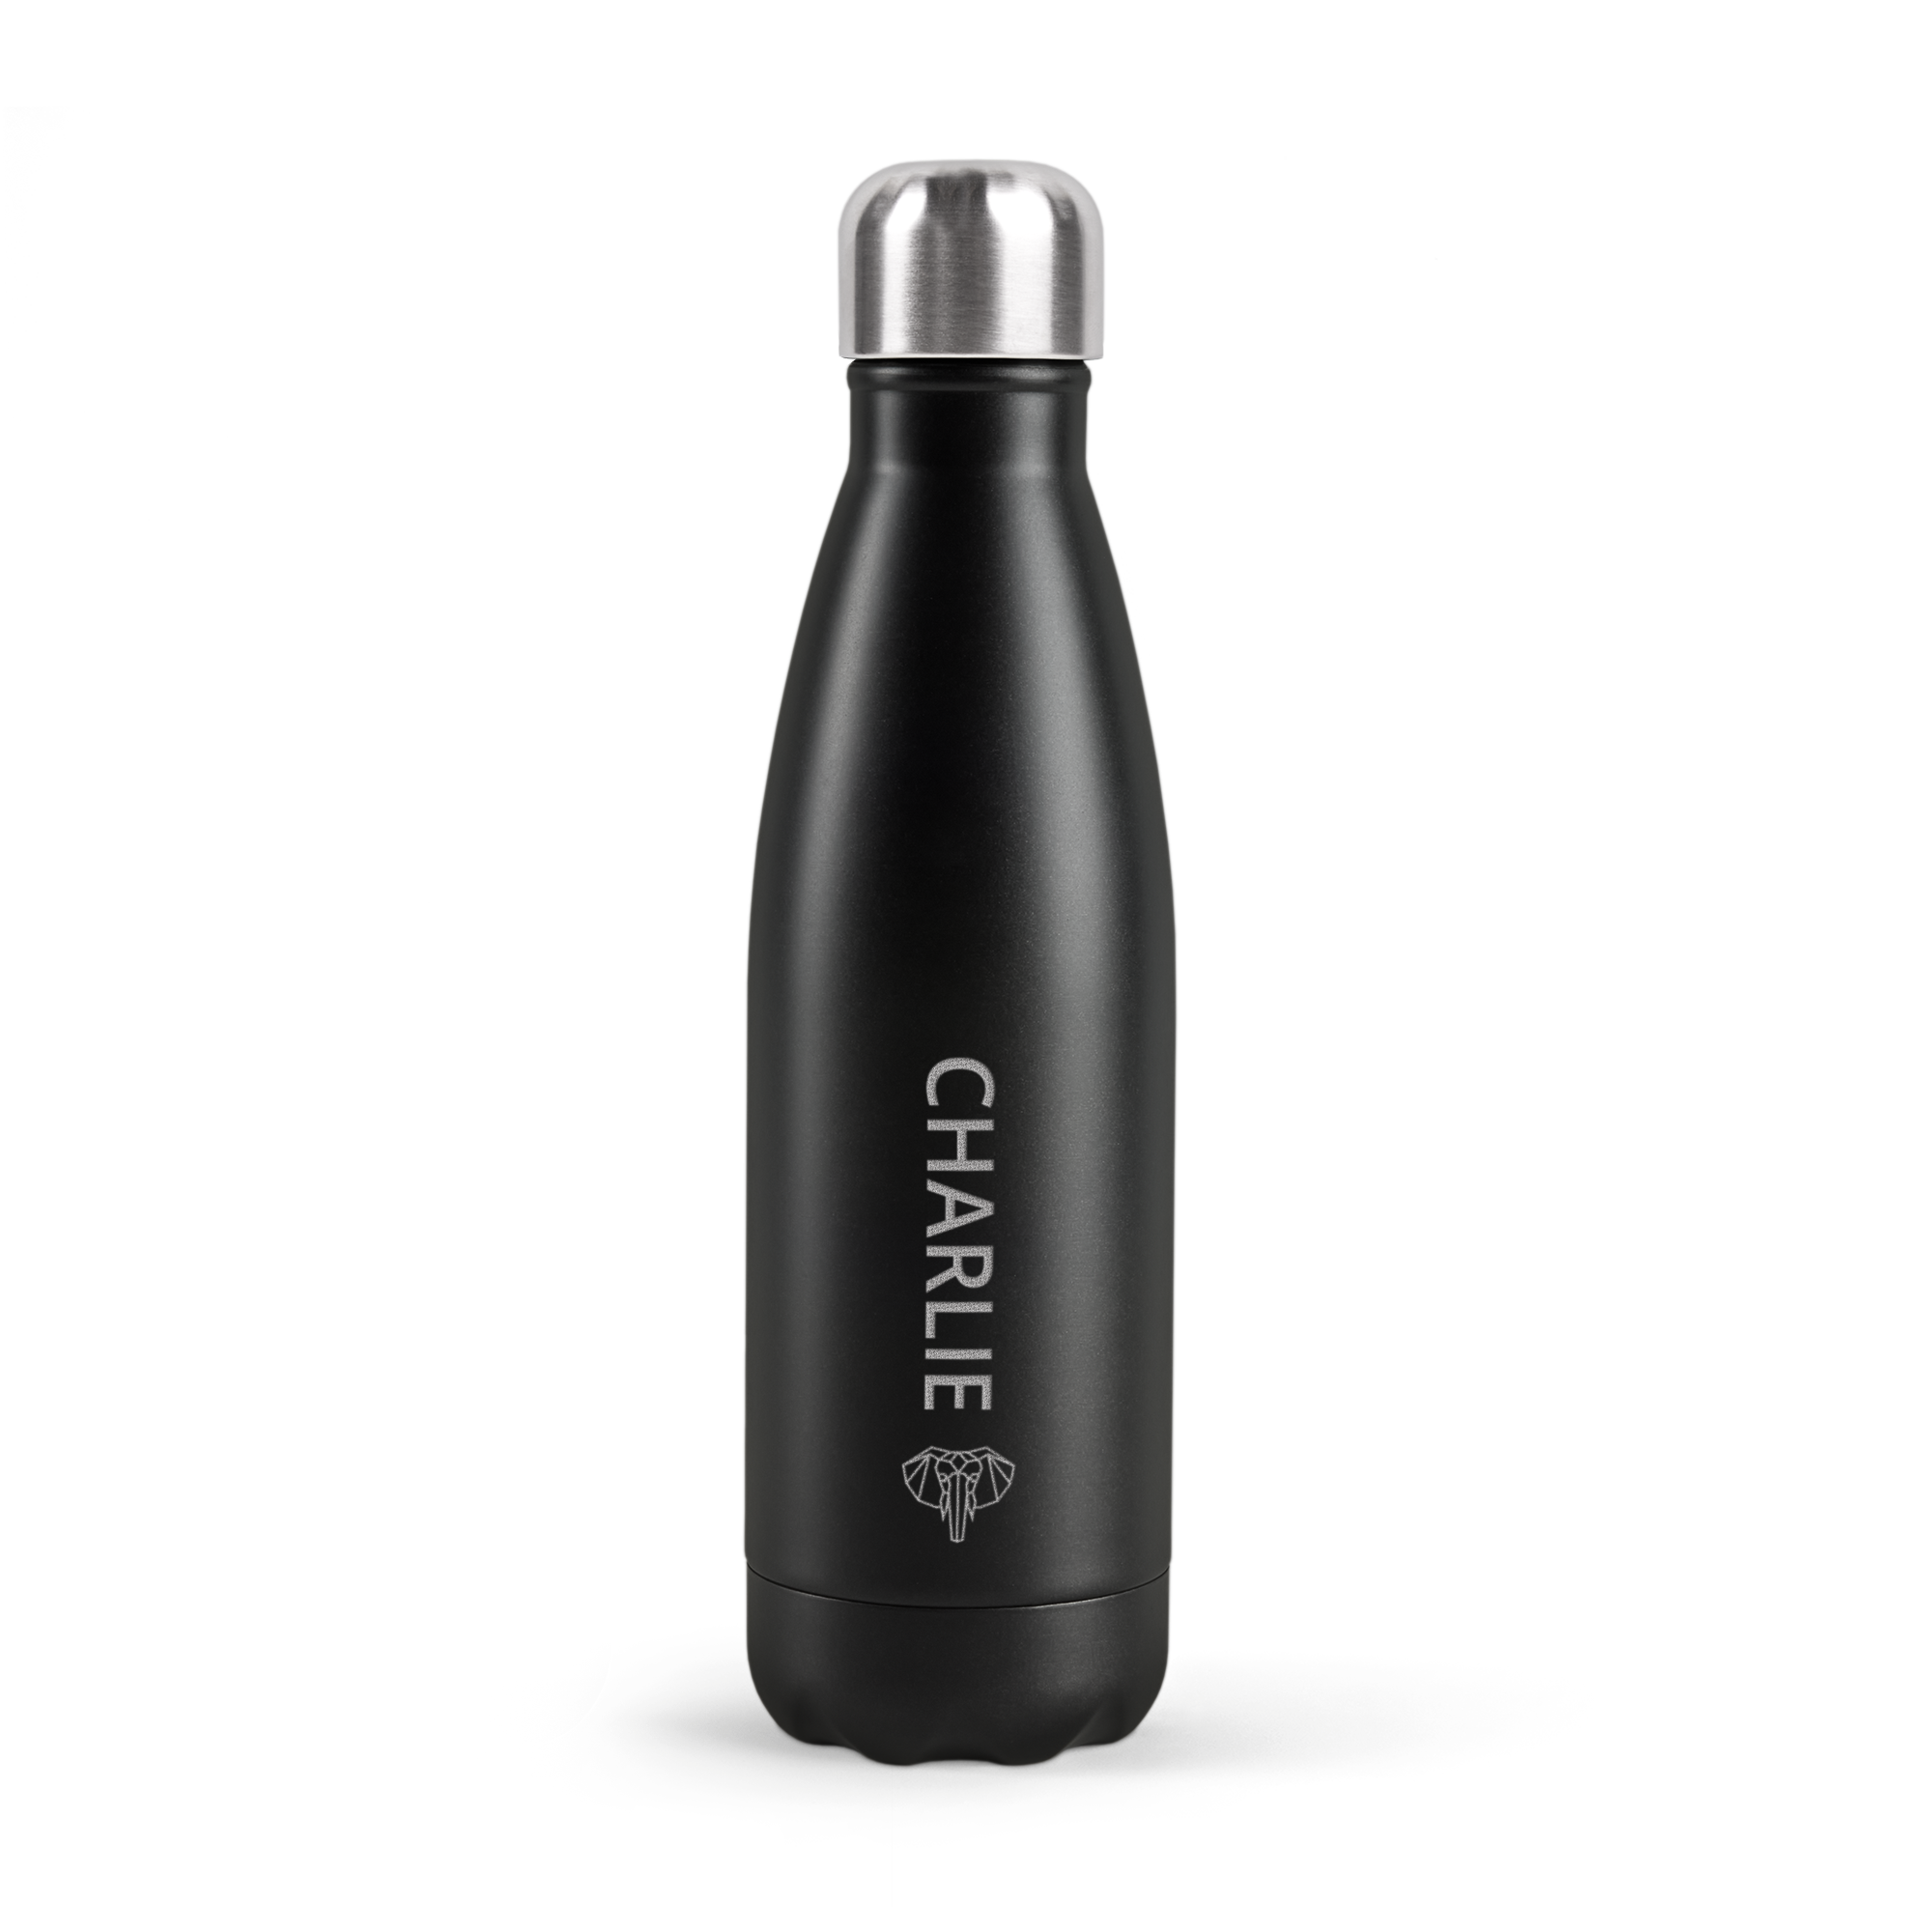 Personalised thermos flask